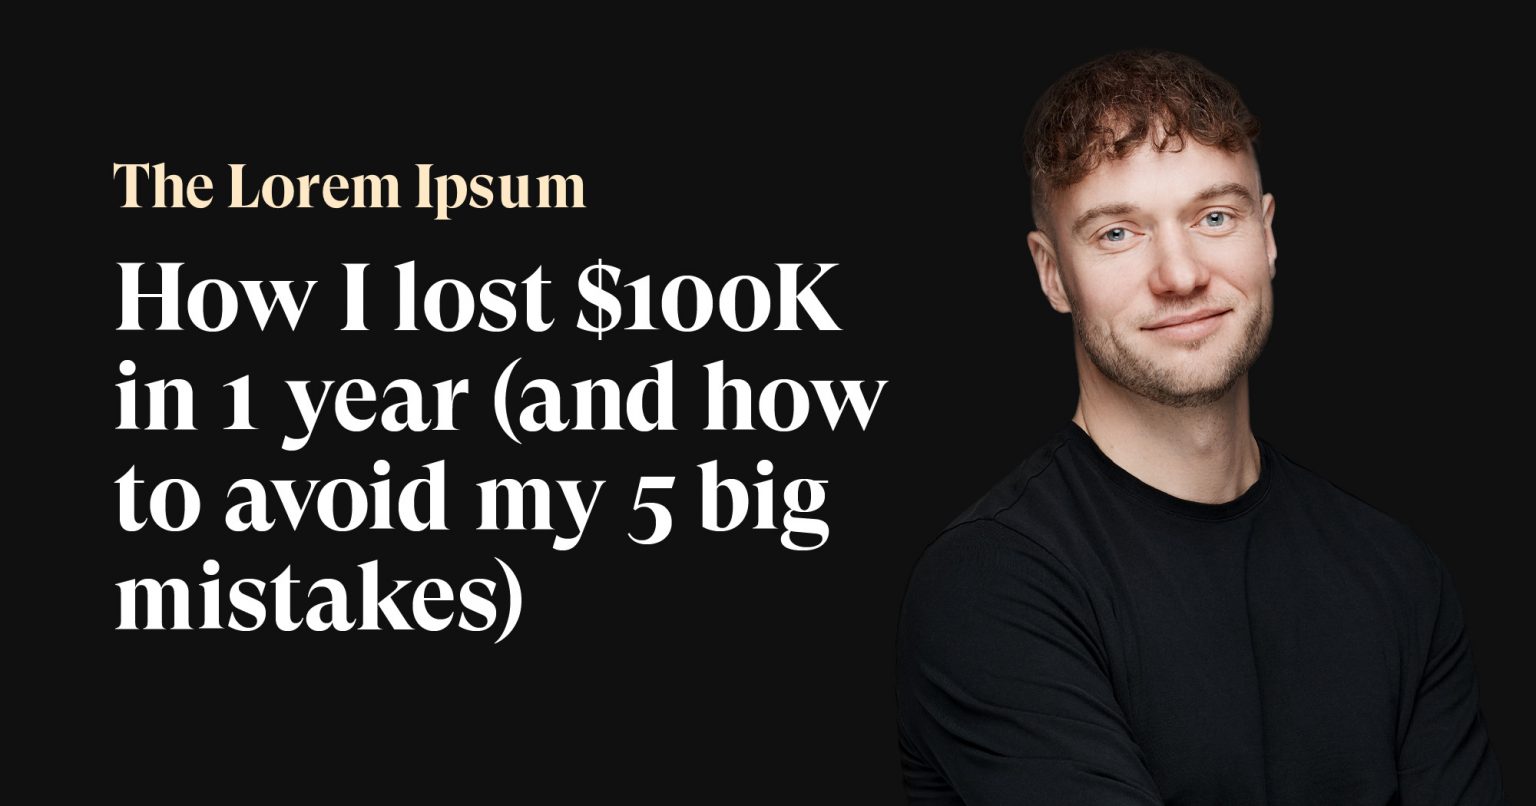 Lorem Ipsum #19: How I lost $100K in 1 year (and how to avoid my 5 big mistakes)